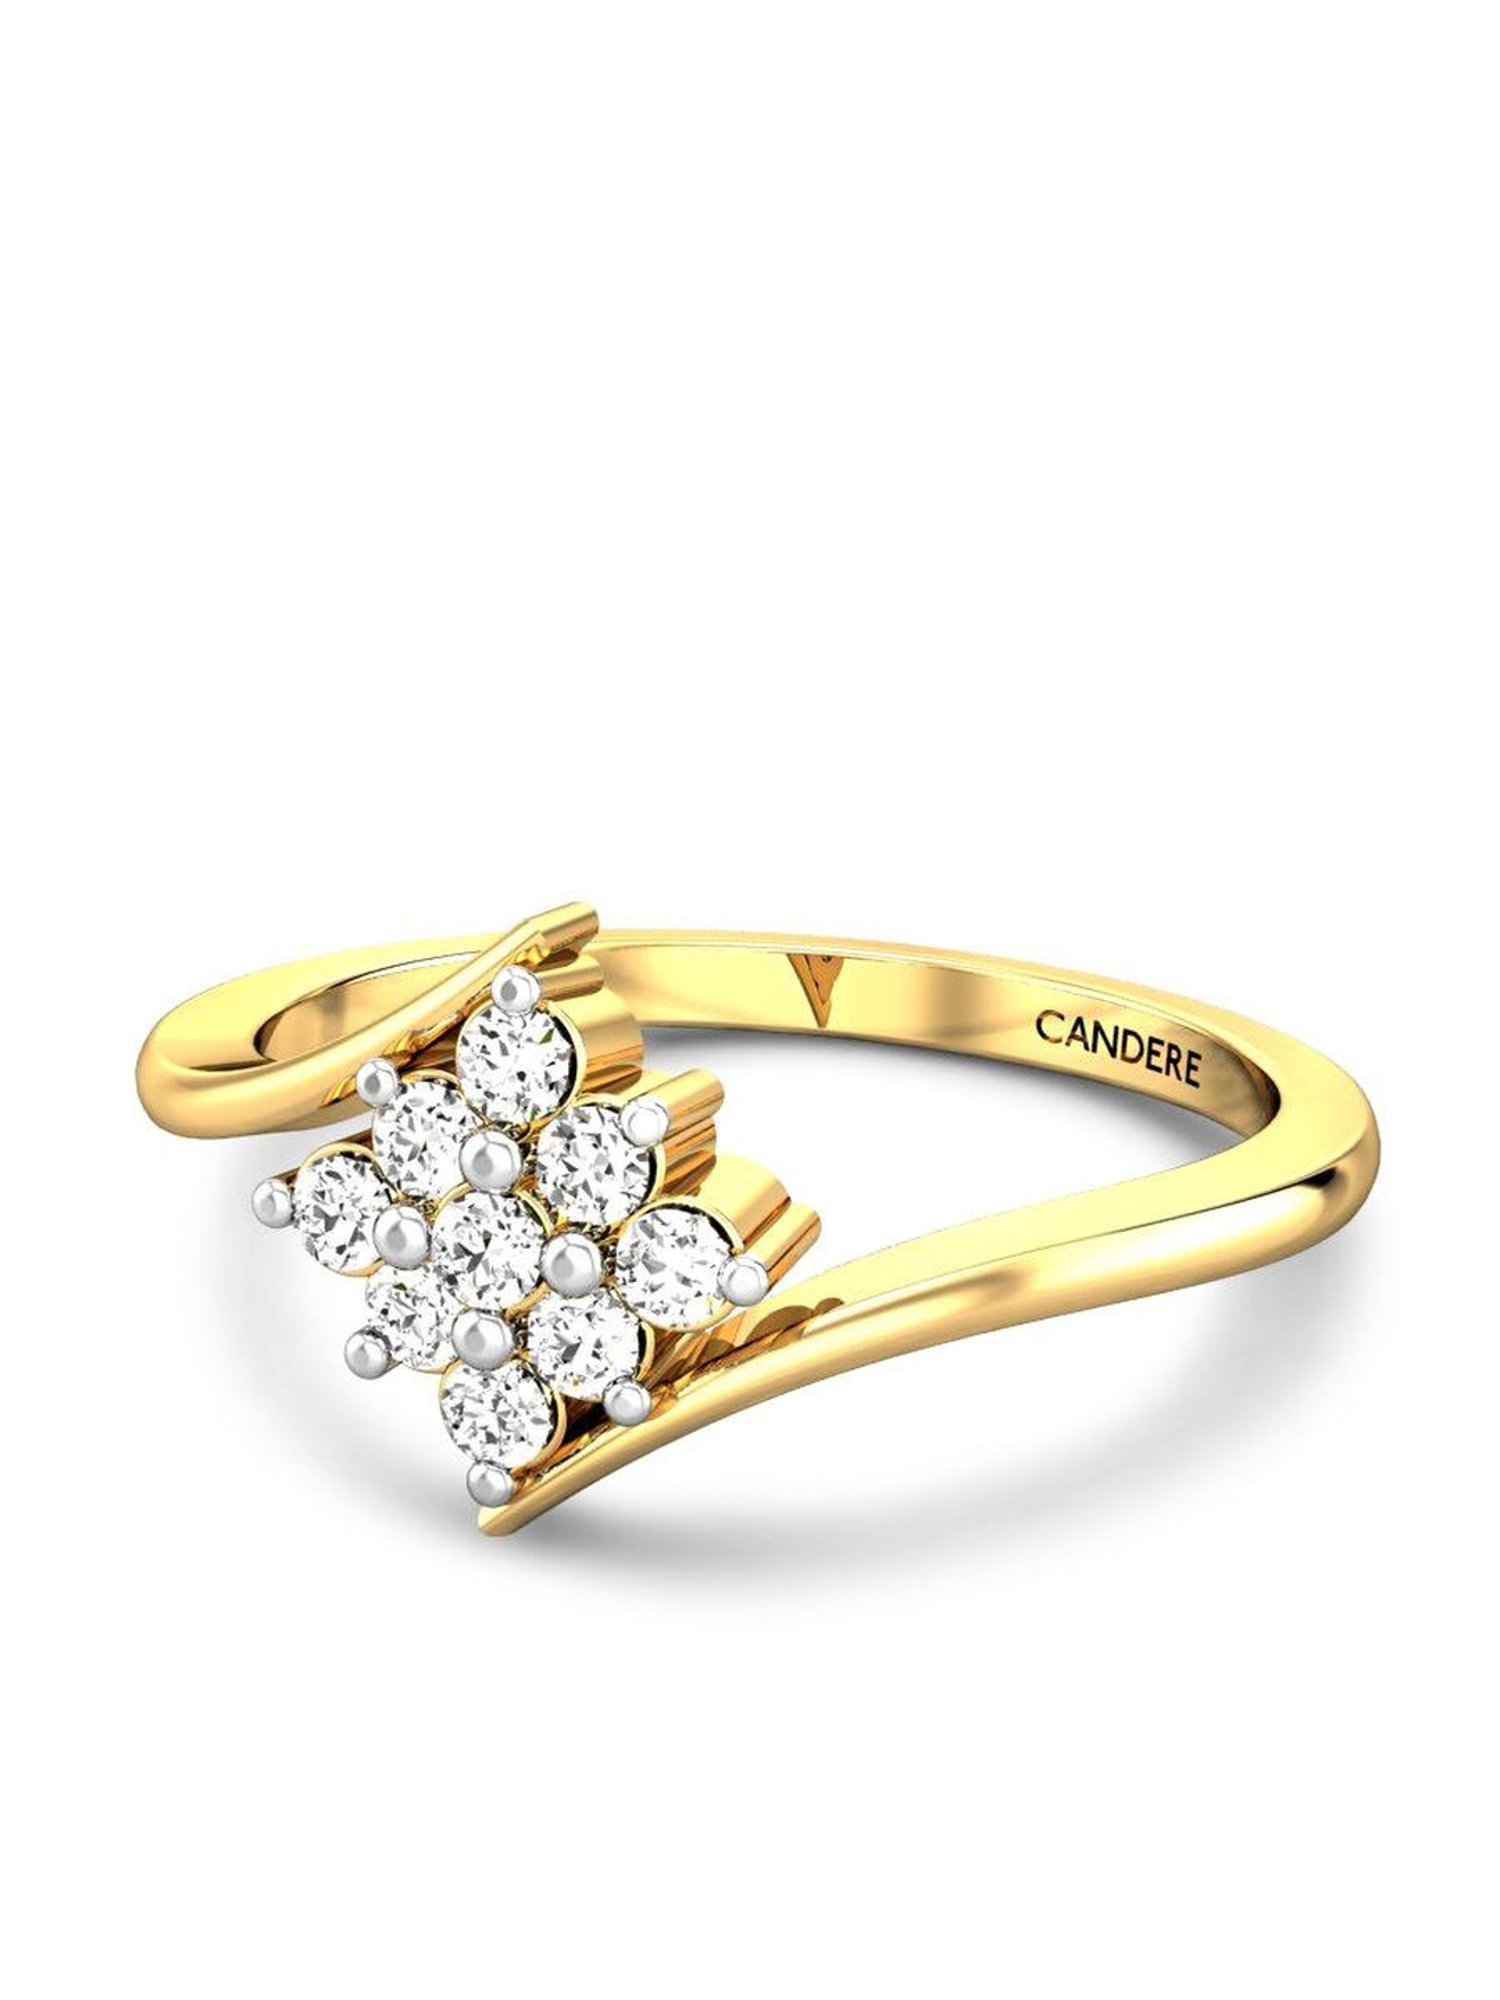 Candere A Kalyan Jewellers Company in Malad West,Mumbai - Best Jewellery  Showrooms in Mumbai - Justdial